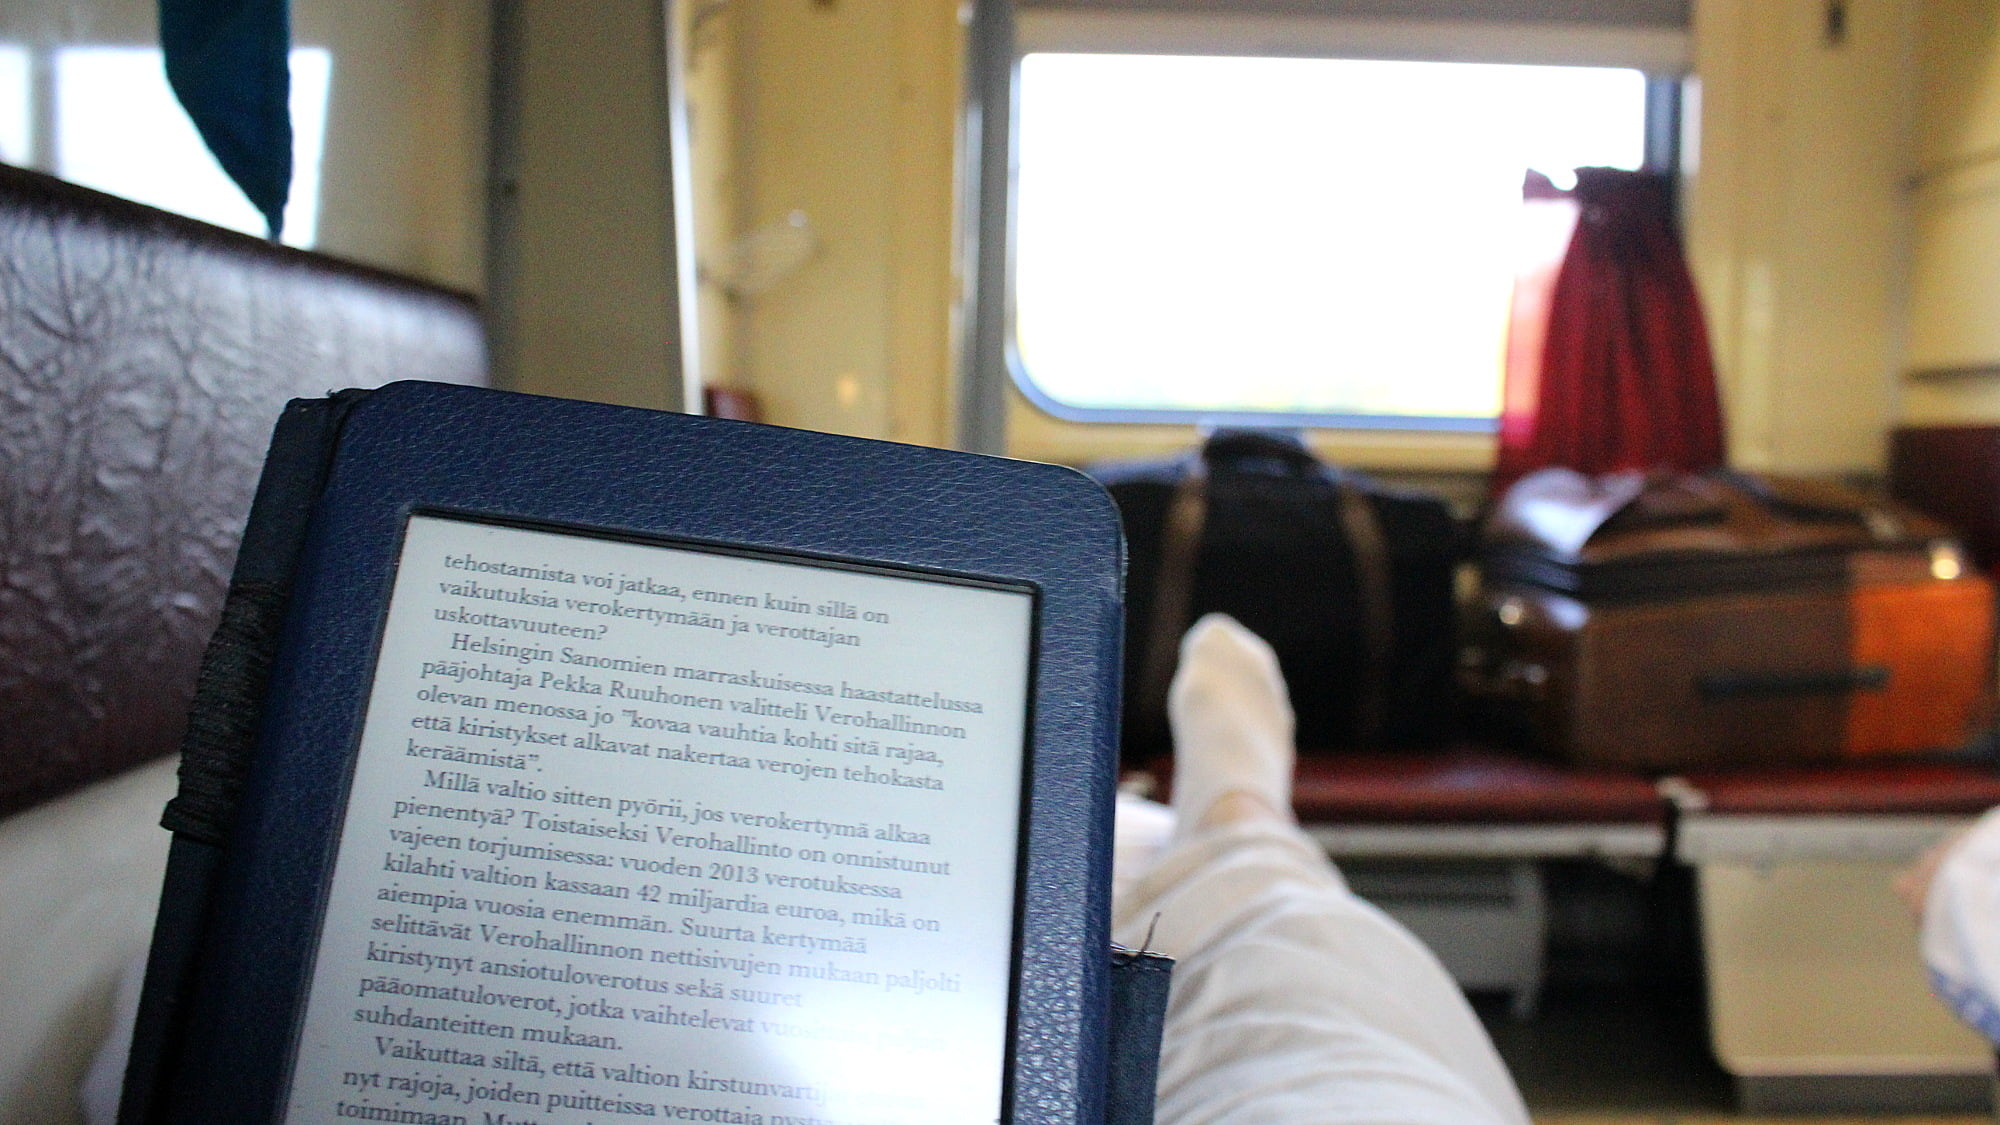 Reading Amazon Kindle Paperwhite when traveling on a sleeper car of a train. A good way to waste time during long train journeys.